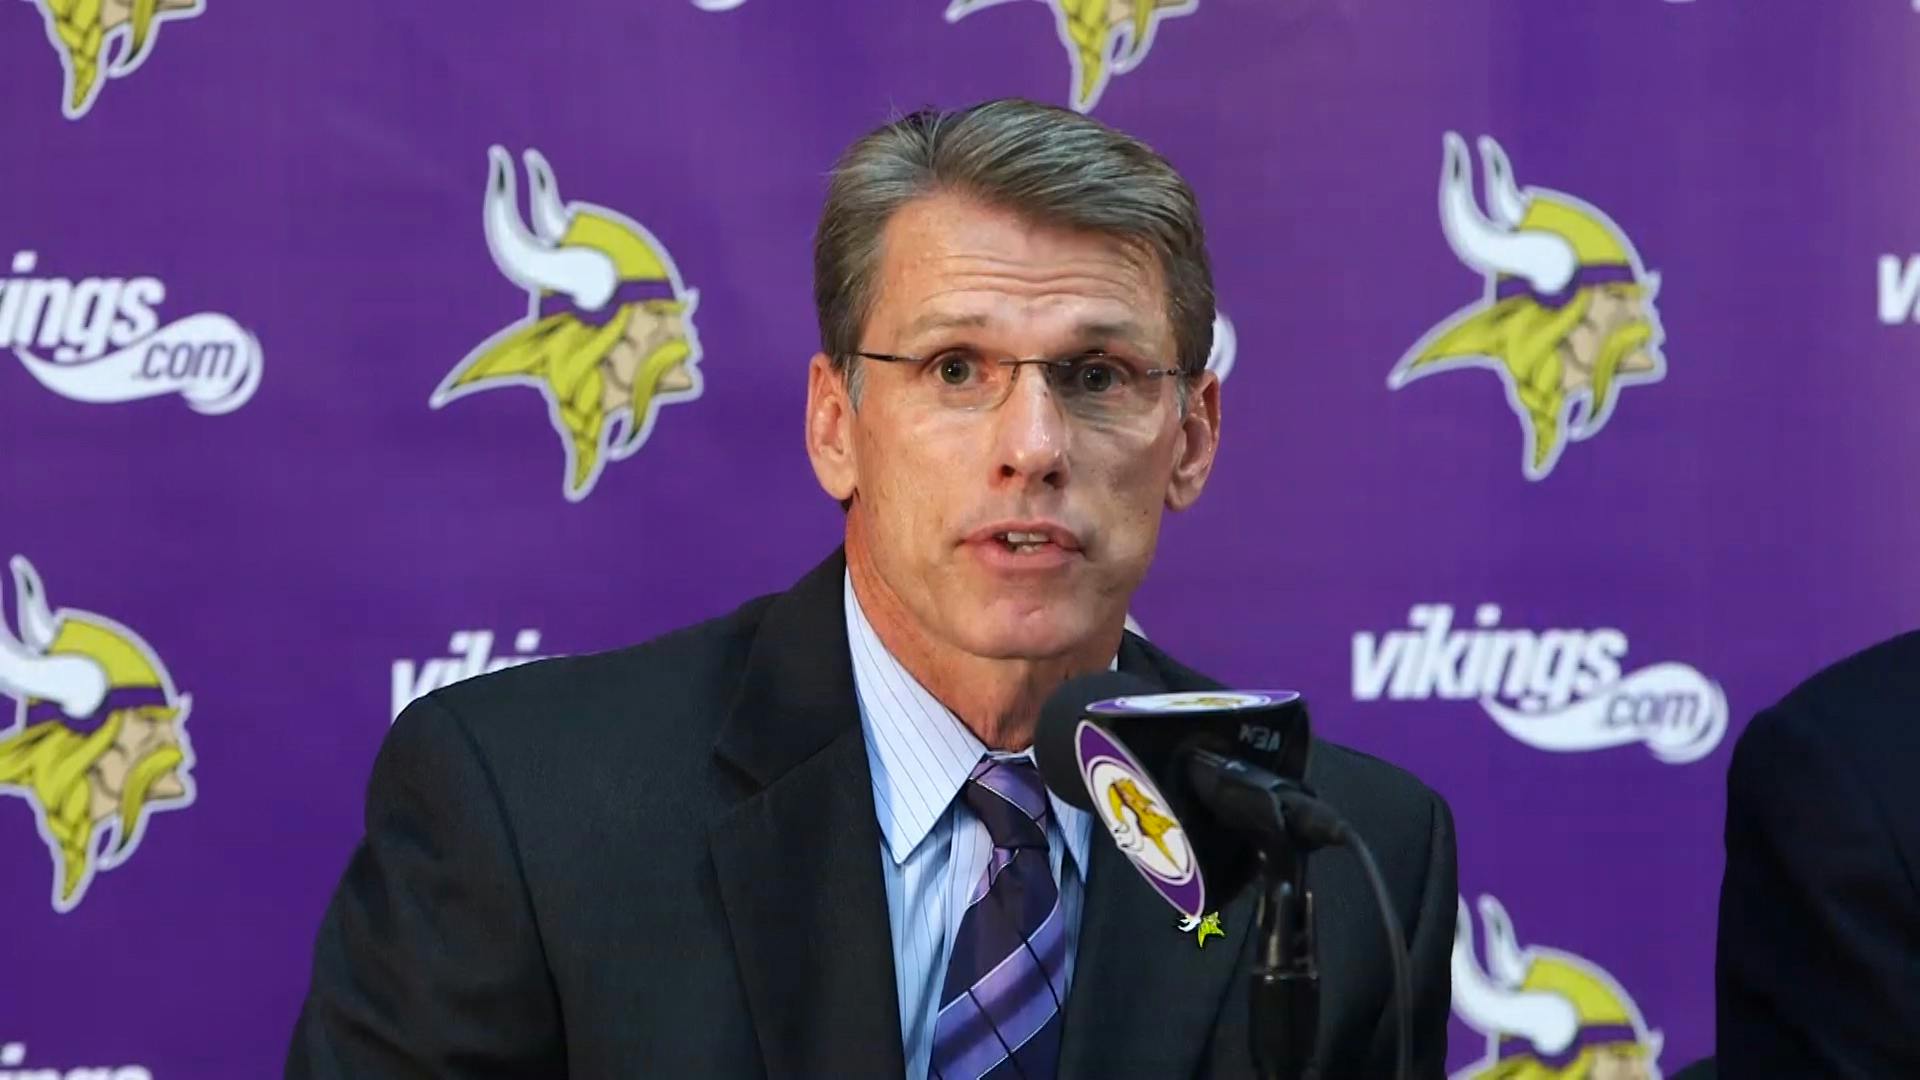 A public relations professional gives his opinion on how the Vikings should have handled the Adrian Peterson news.